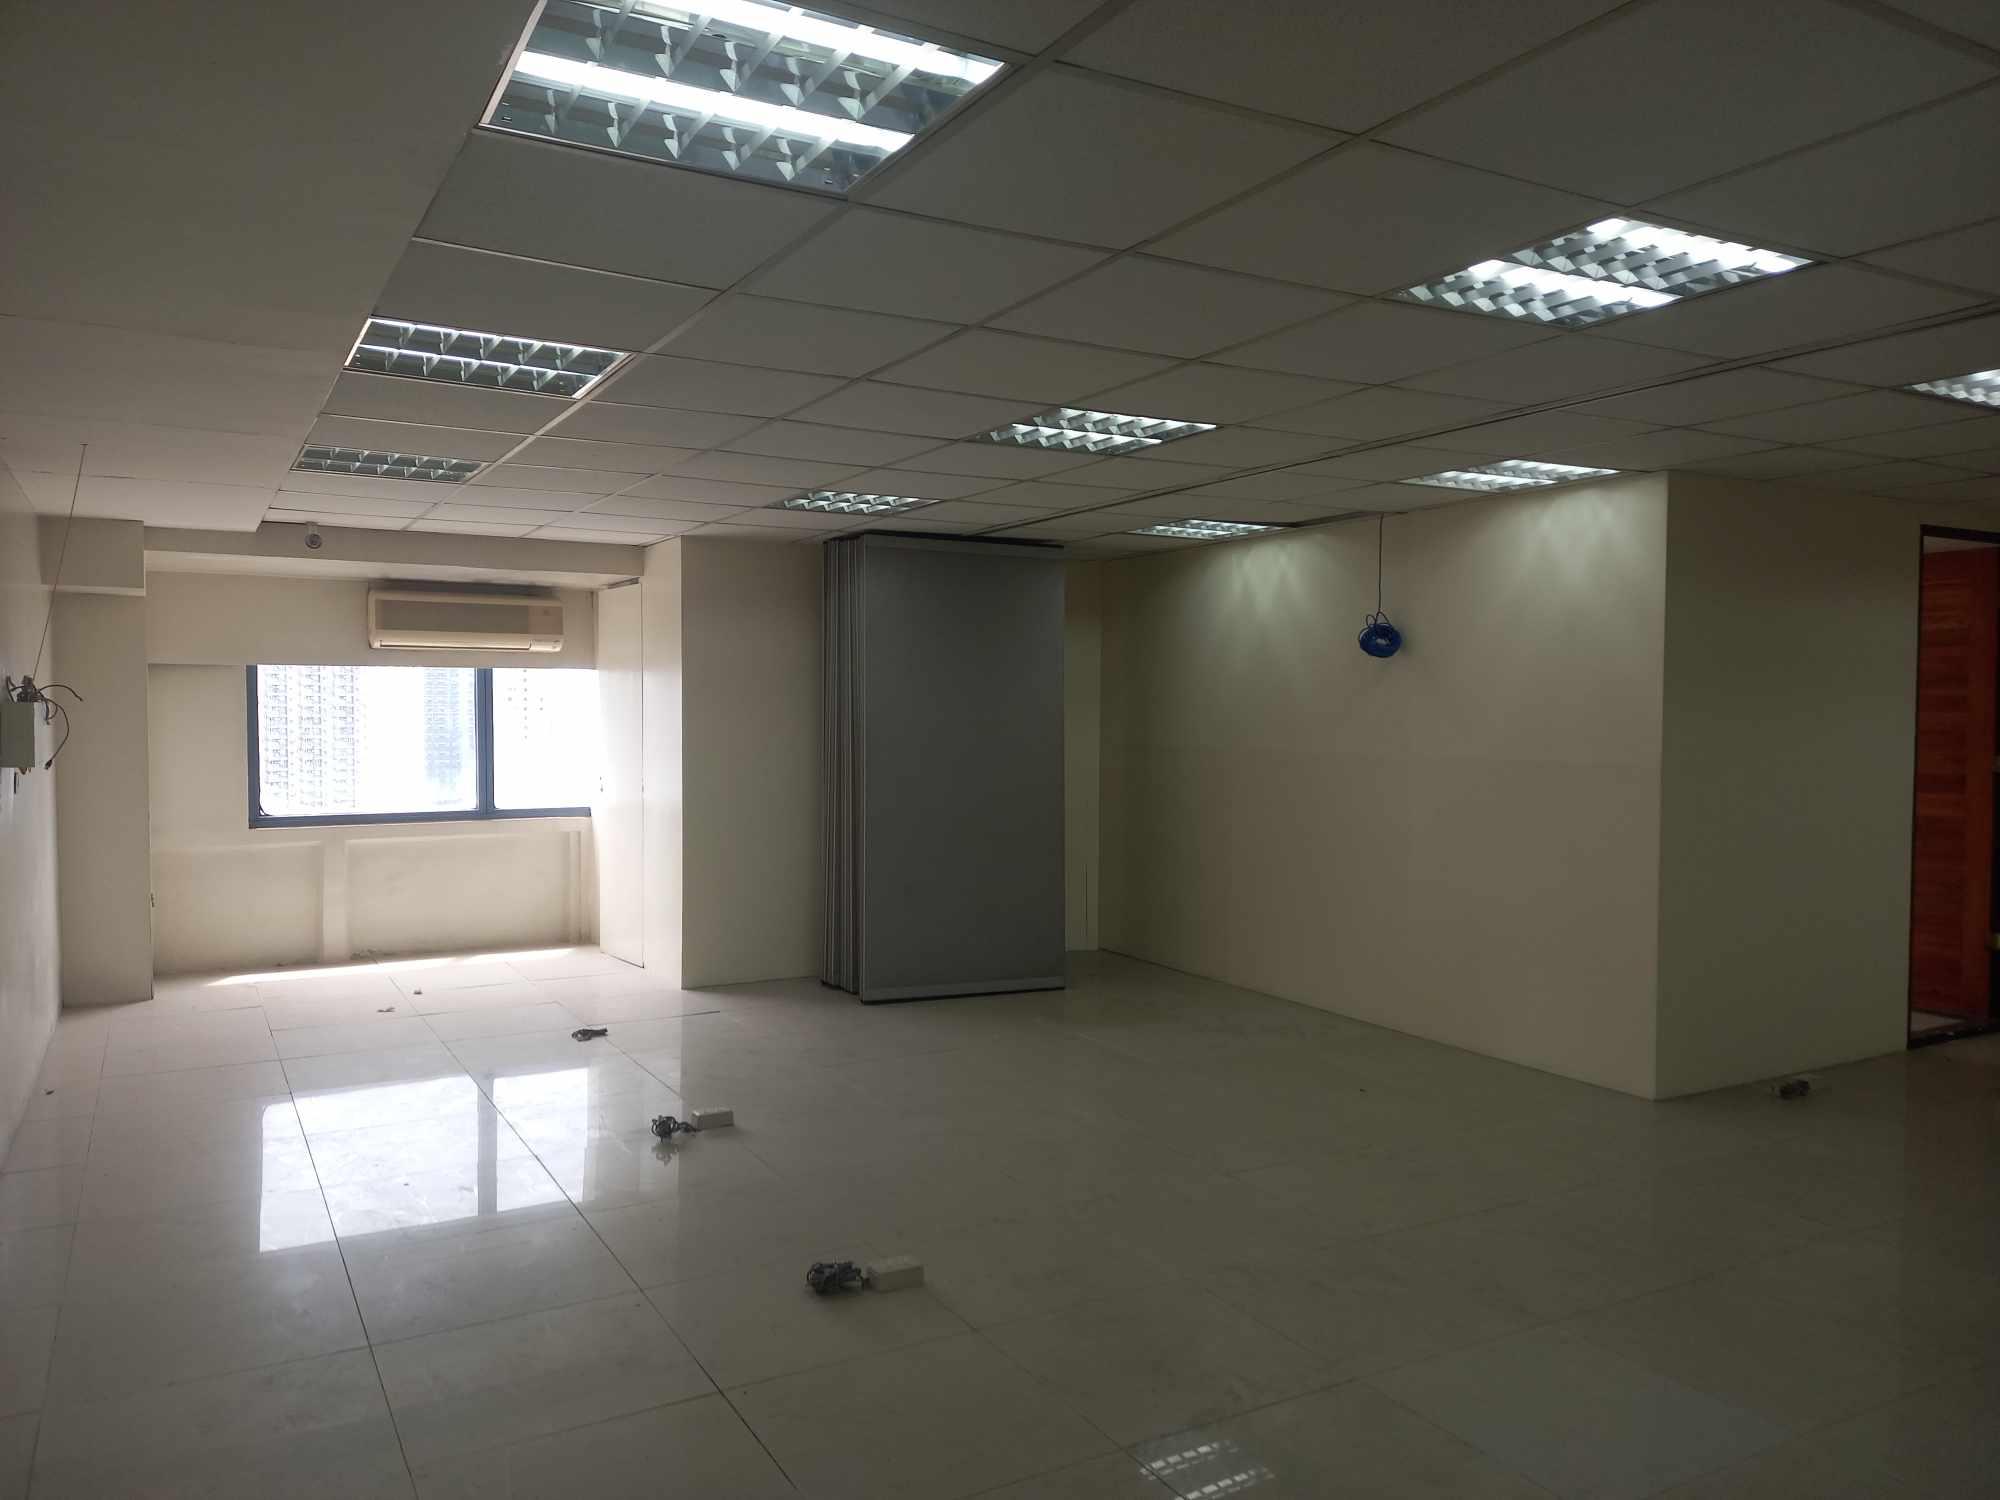 For Rent Lease 130 sqm Office Space Shaw Mandaluyong City